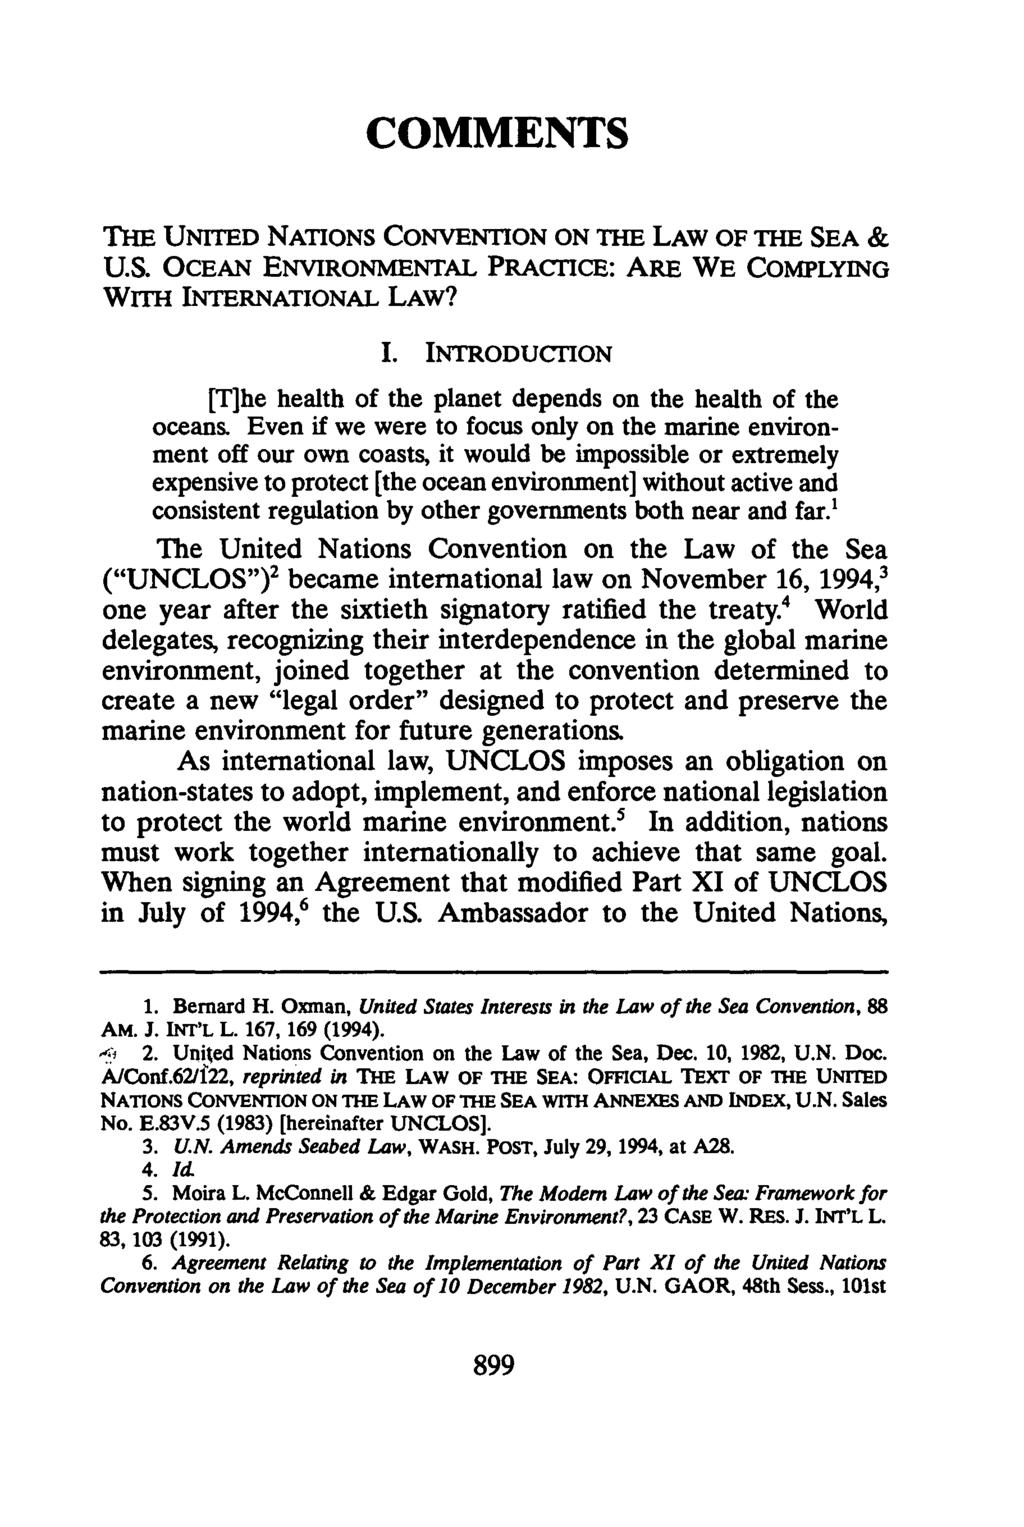 COMMENTS THE UNITED NATIONS CONVENTION ON THE LAW OF THE SEA & U.S. OCEAN ENVIRONMENTAL PRACTCE: ARE WE COMPLYING WITH INTERNATIONAL LAW? I. INTRODUCTION [T]he health of the planet depends on the health of the oceans.